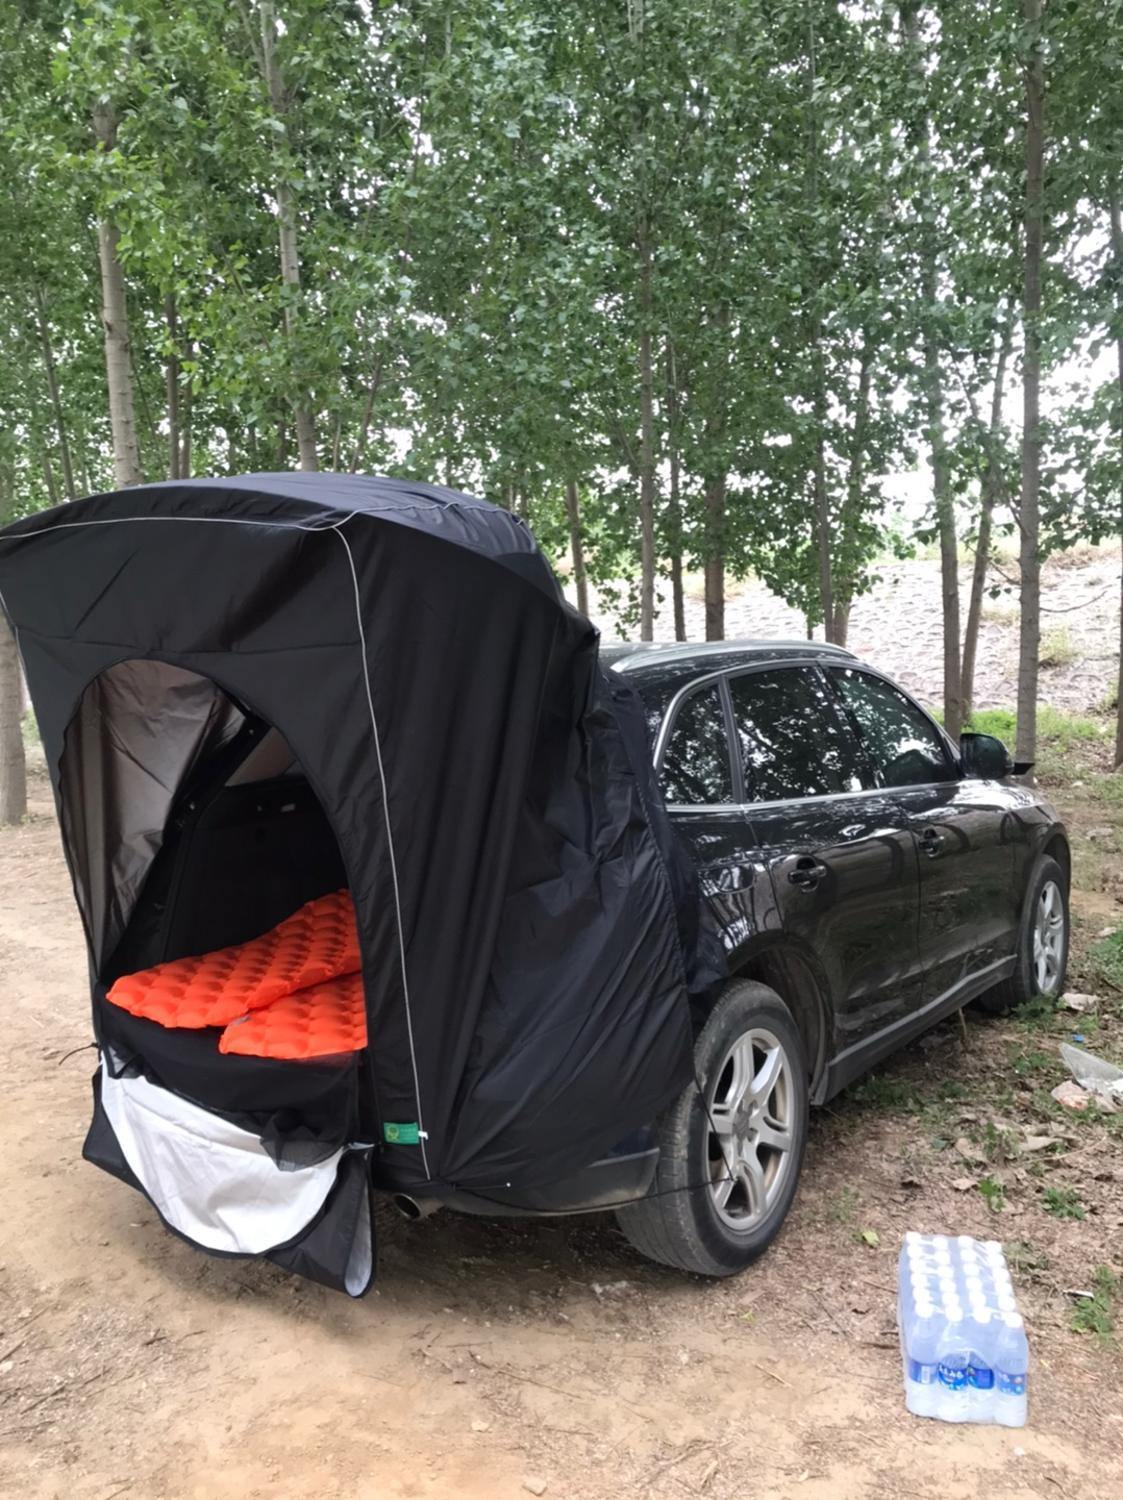  Vehicle SUV Rear Tent for Camping Car Tents Car Awning Sun  Shelter : Everything Else